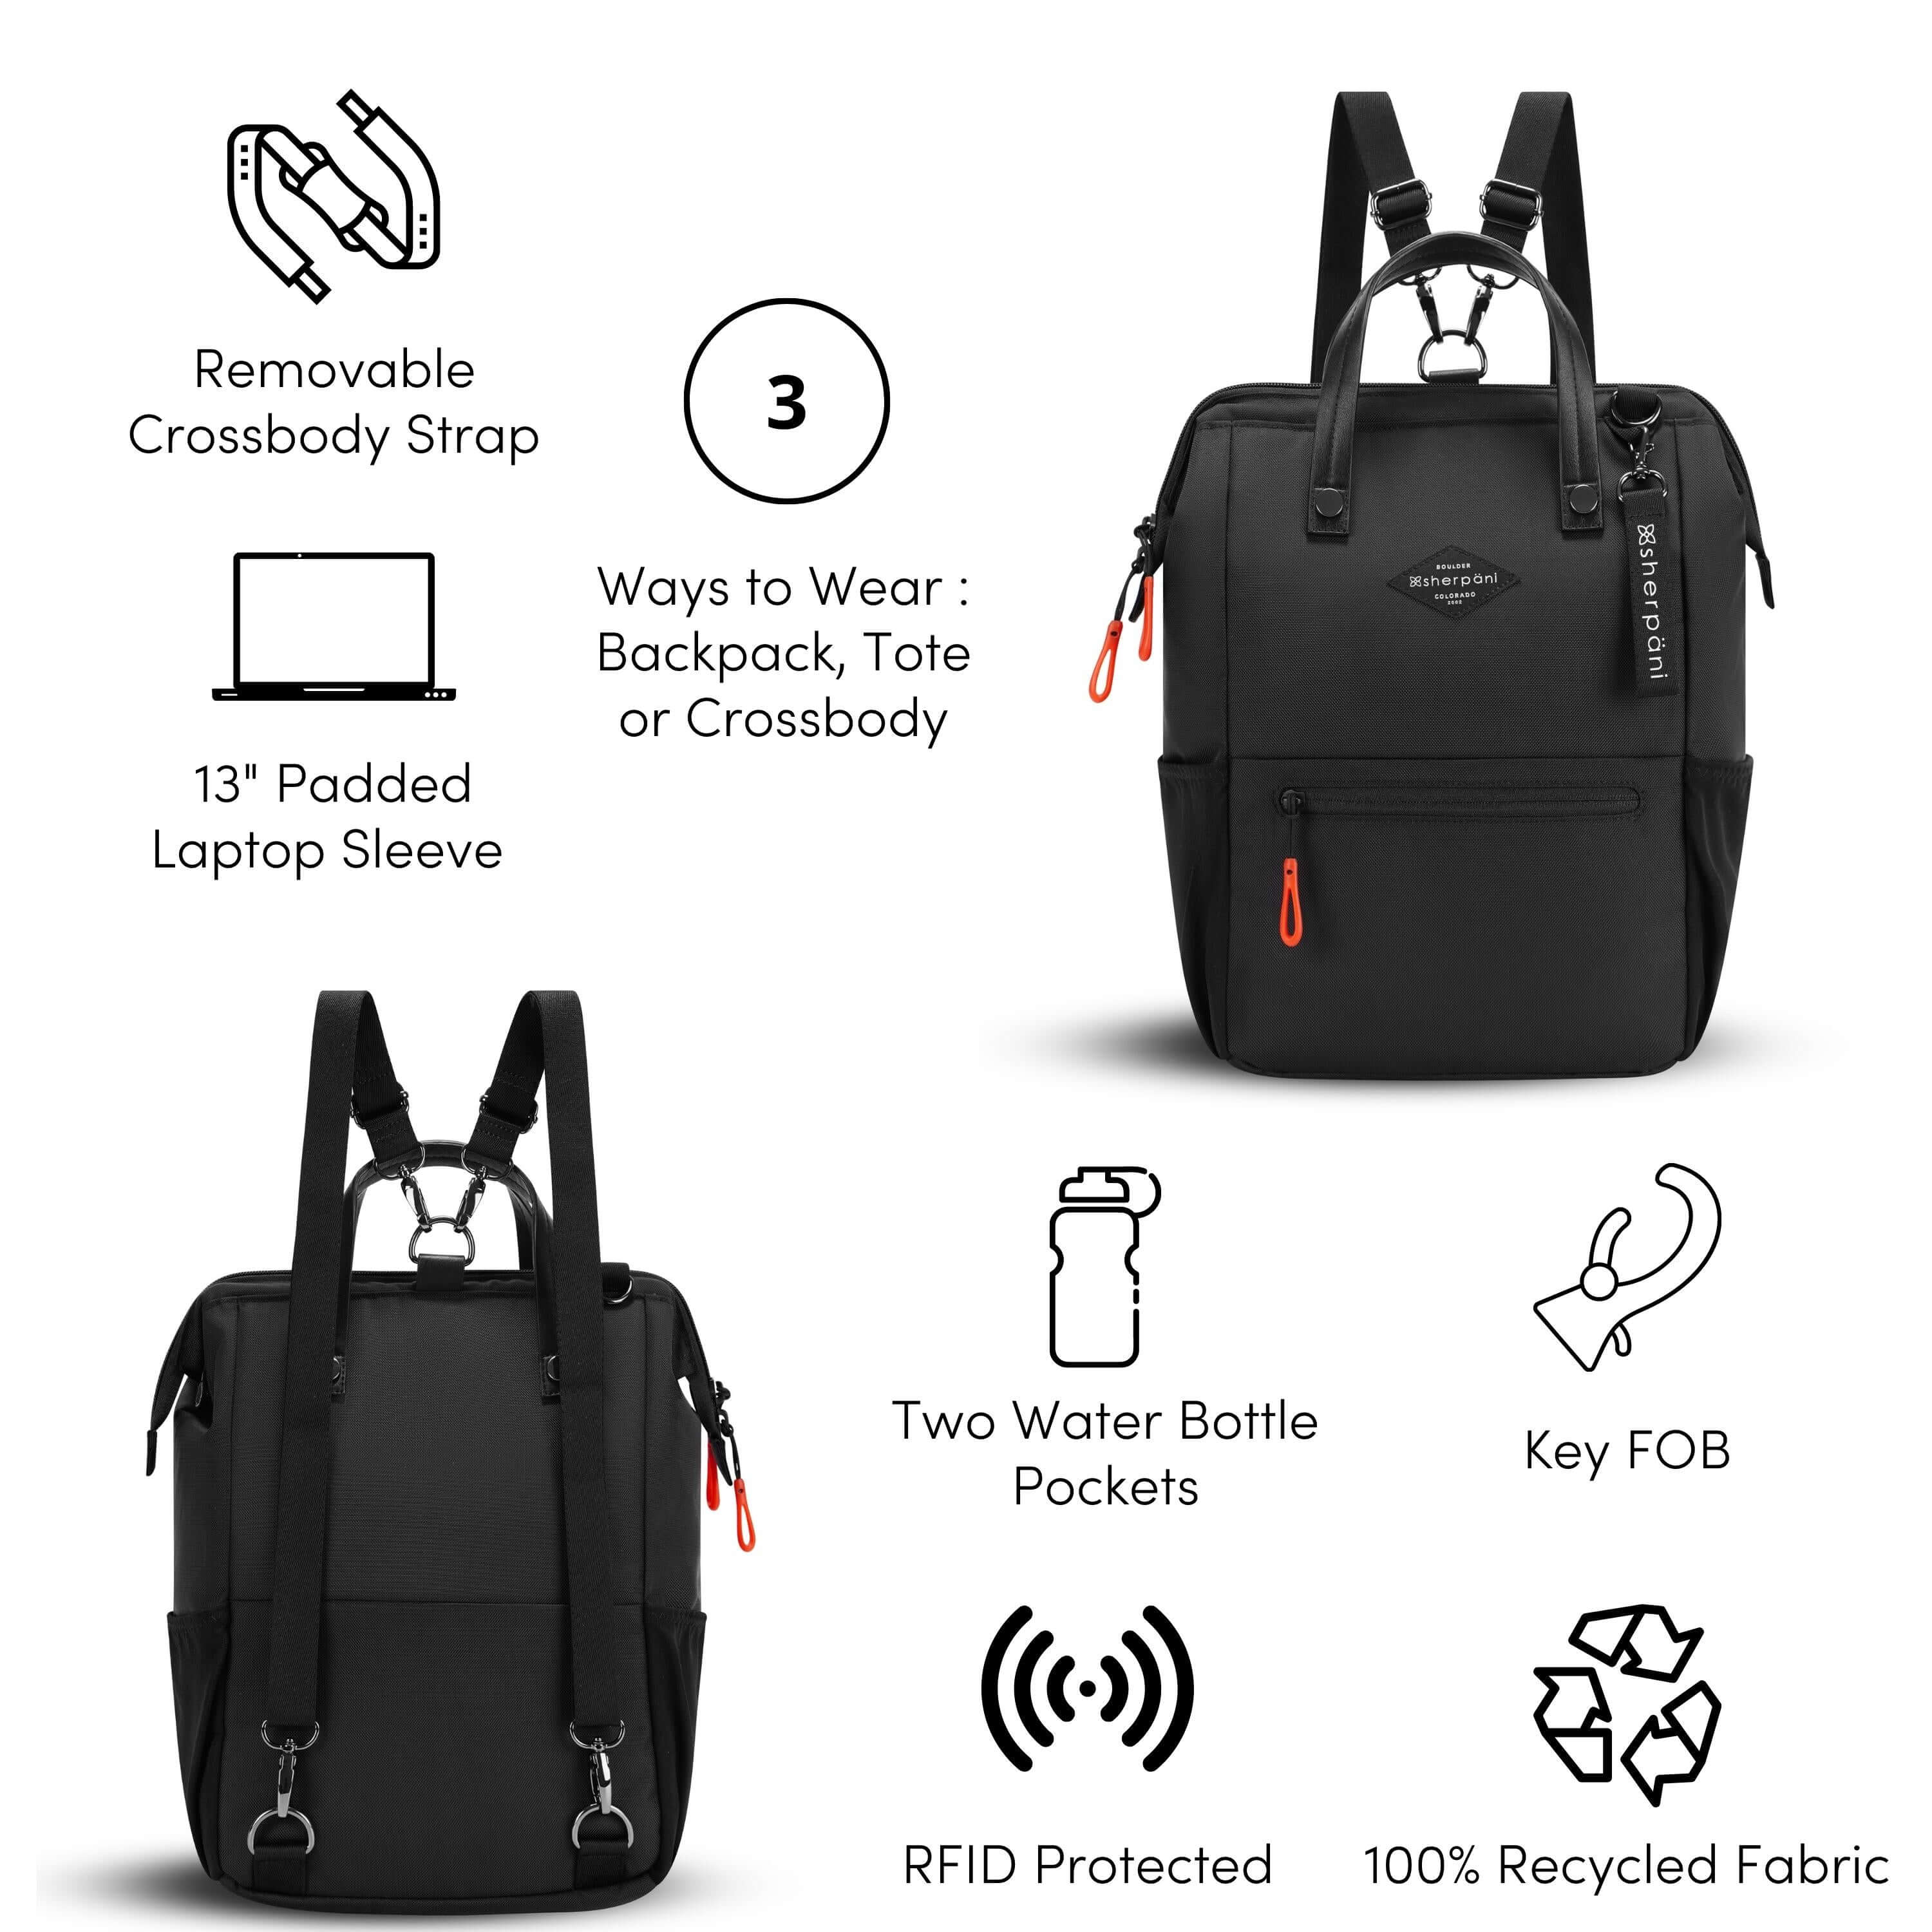 A Graphic showing the features of Sherpani’s crossbody, the Dispatch. There is a front and back view of the bag. The following features are highlighted with corresponding graphics: Removable Crossbody Strap, 13&quot; Padded Laptop Sleeve, 3 Ways to Wear: Backpack, Tote or Crossbody, Two Water Bottle Pockets, Key FOB, RFID Protected, 100% Recycled Fabric.